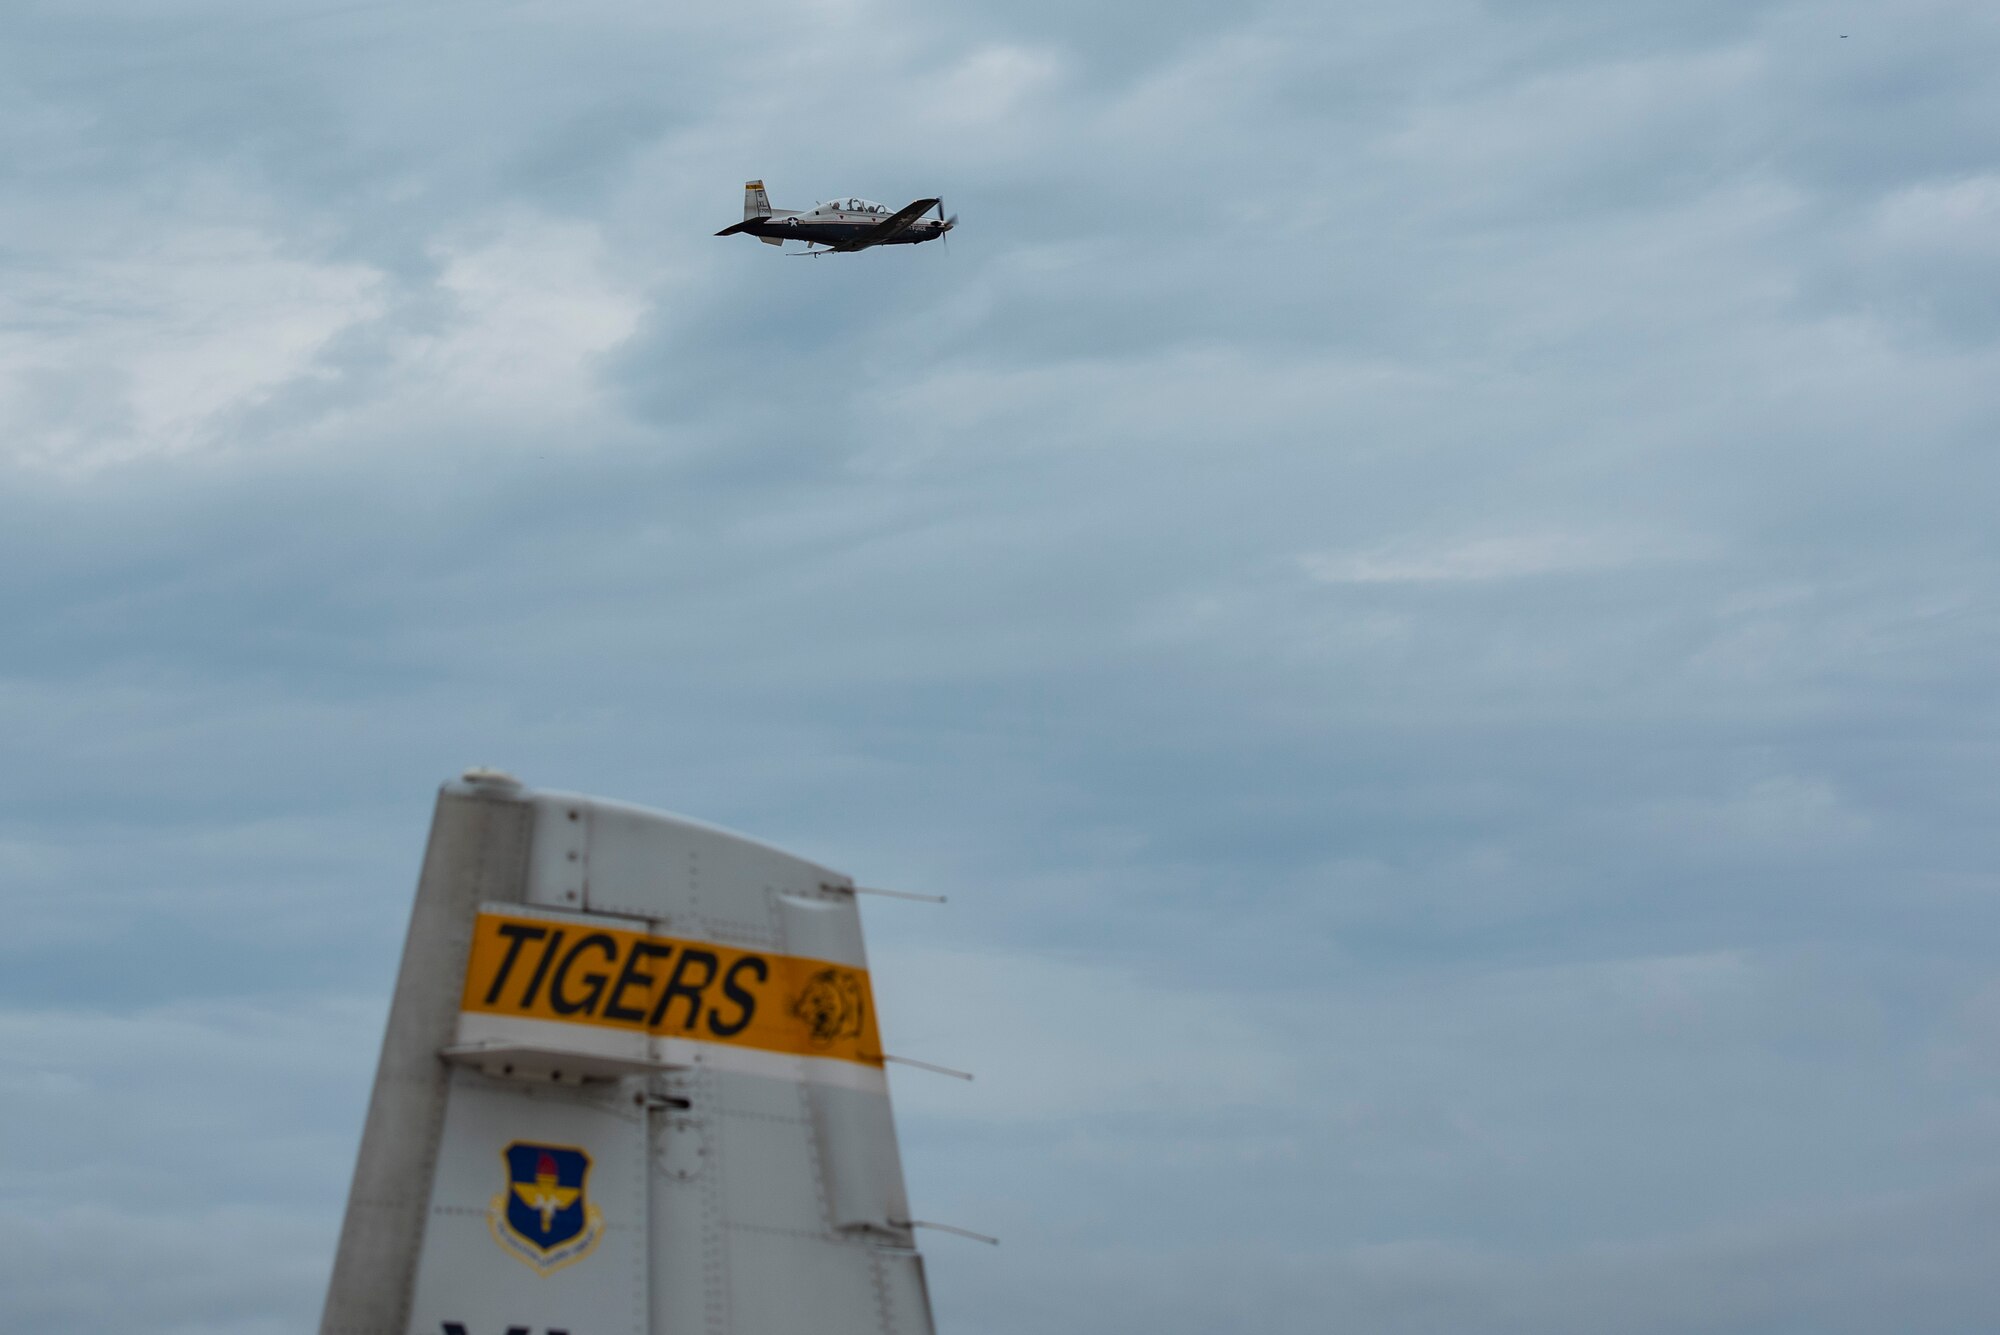 A T-6 Texan II glides through the air over Laughlin Air Force Base on 8/5 day on Aug. 5, 2021.Pilots on Tiger Day took to the sky to celebrate their heritage for being a part of the 85th Flying Training Squadron in a competition against fellow instructor pilots. (U.S. Air Force Photo by Airman 1st Class David Phaff)